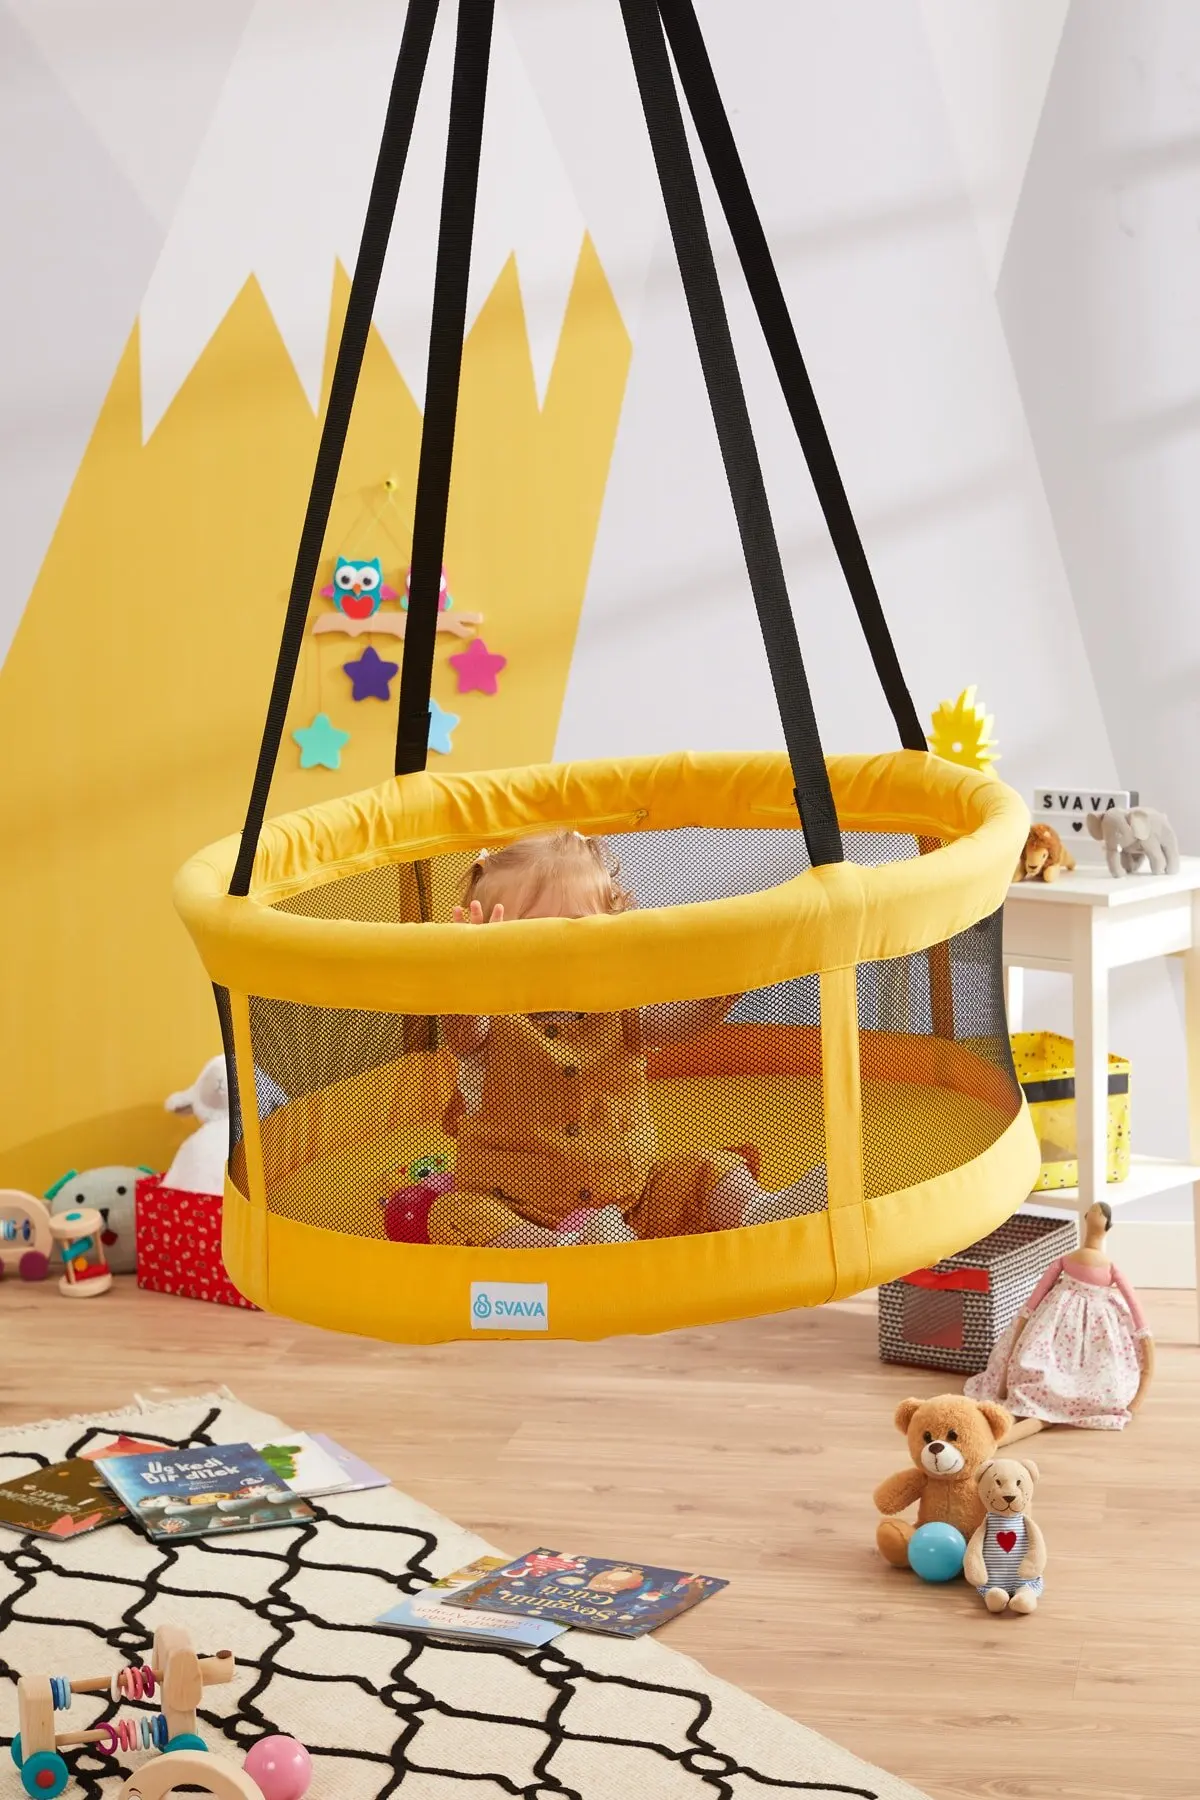 Baby Cotton Swing Chair Hanging Children Kindergarten Toy Outside Indoor Small Basket Yellow Swinging Rocking Chair Baby Toy